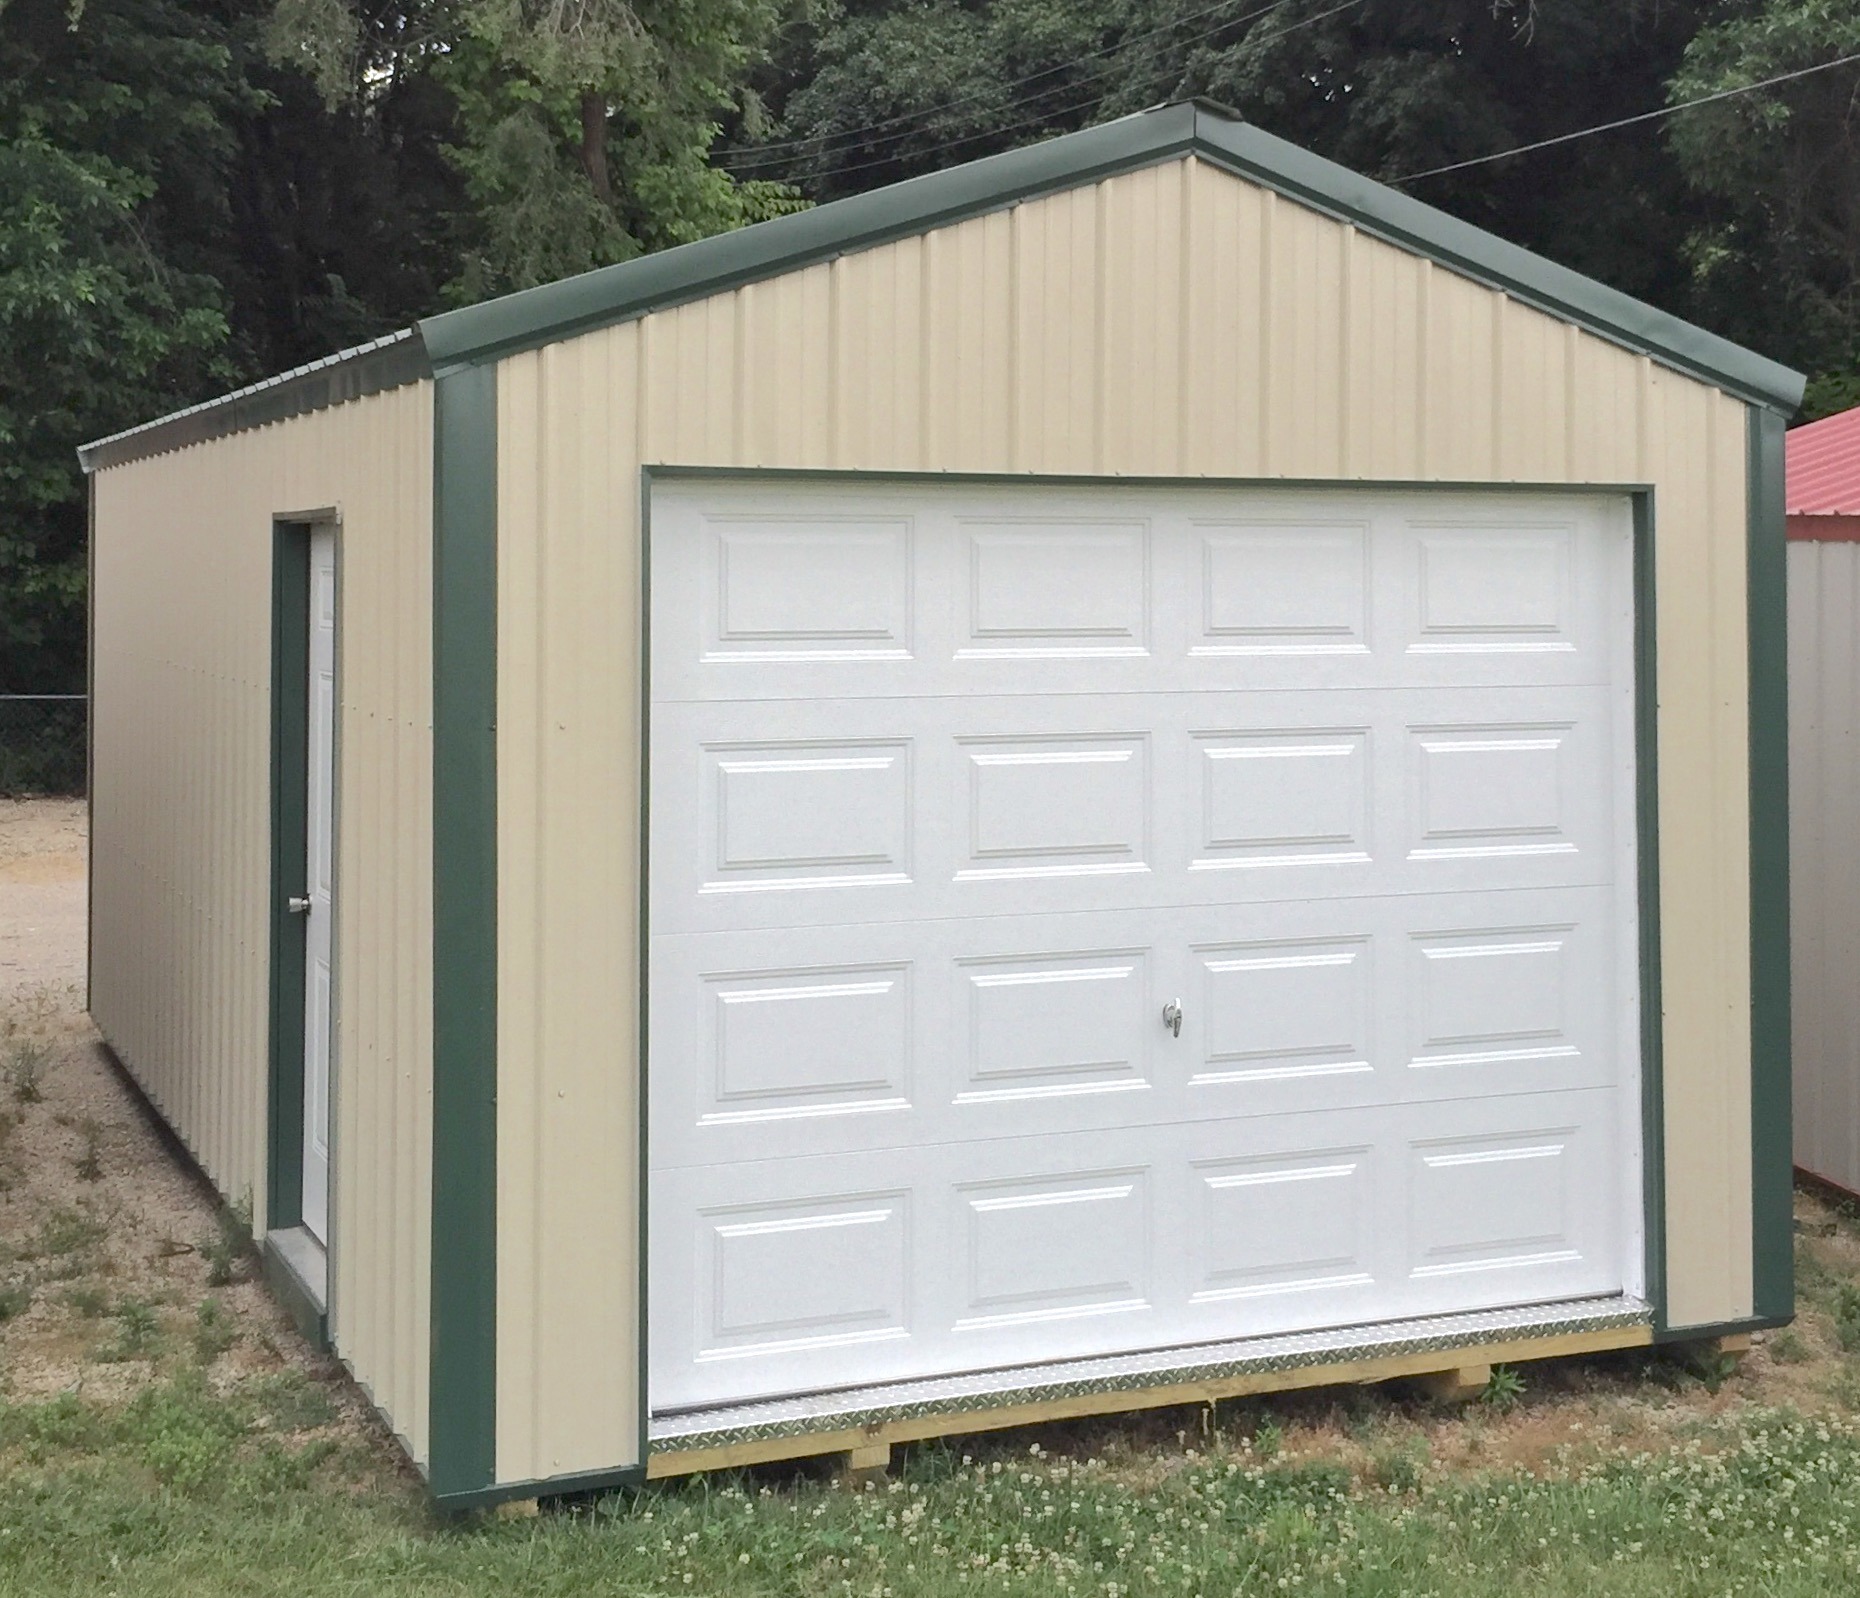 Tan metal garage with green trim and roof